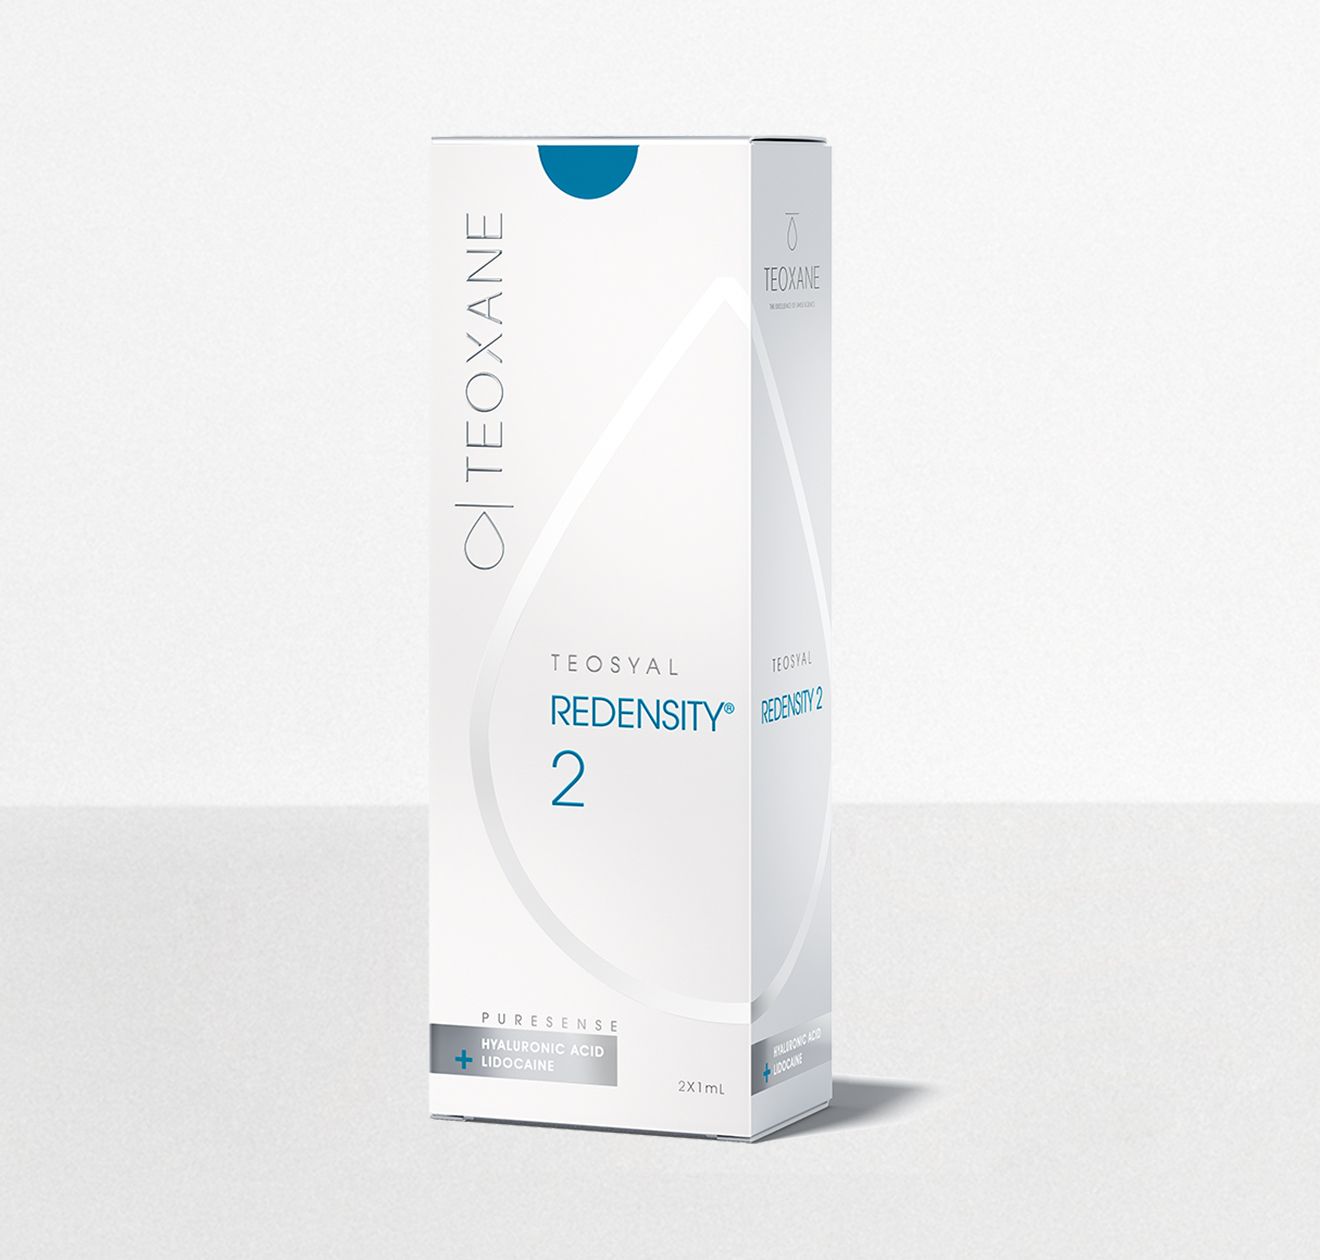 Teosyal® Puresense Redensity 2 1st & Only Hyaluronic Acid Gel Designed For Under Eye Hollows. 